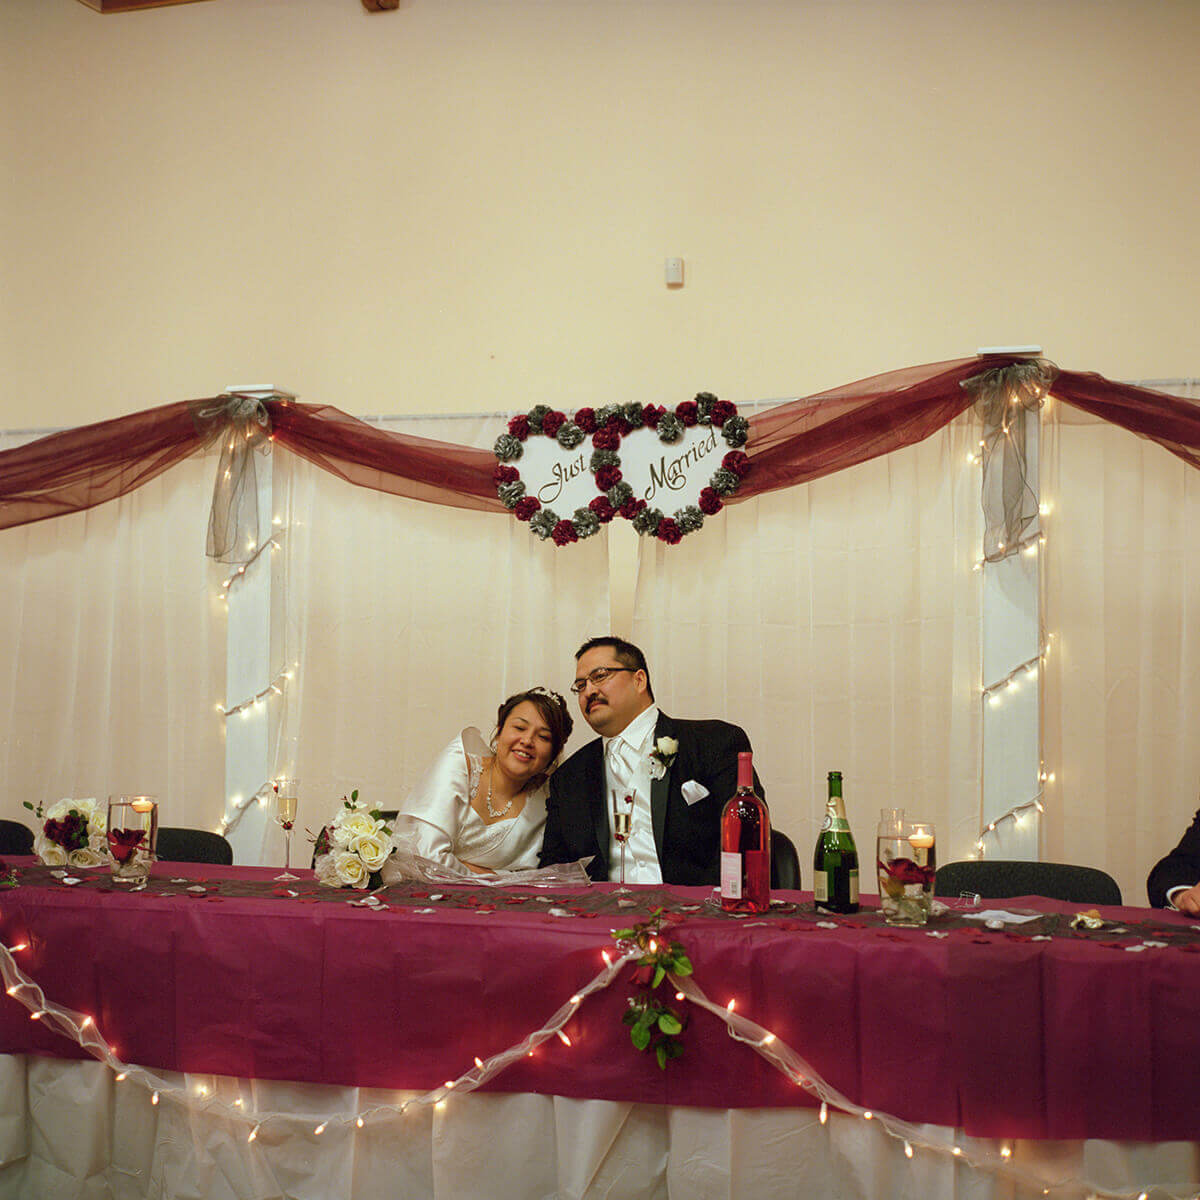 A photo of a couple in wedding clothes sitting at the middle of a table in a wedding venue. Above their heads are two paper heart decorations reading Just Married.